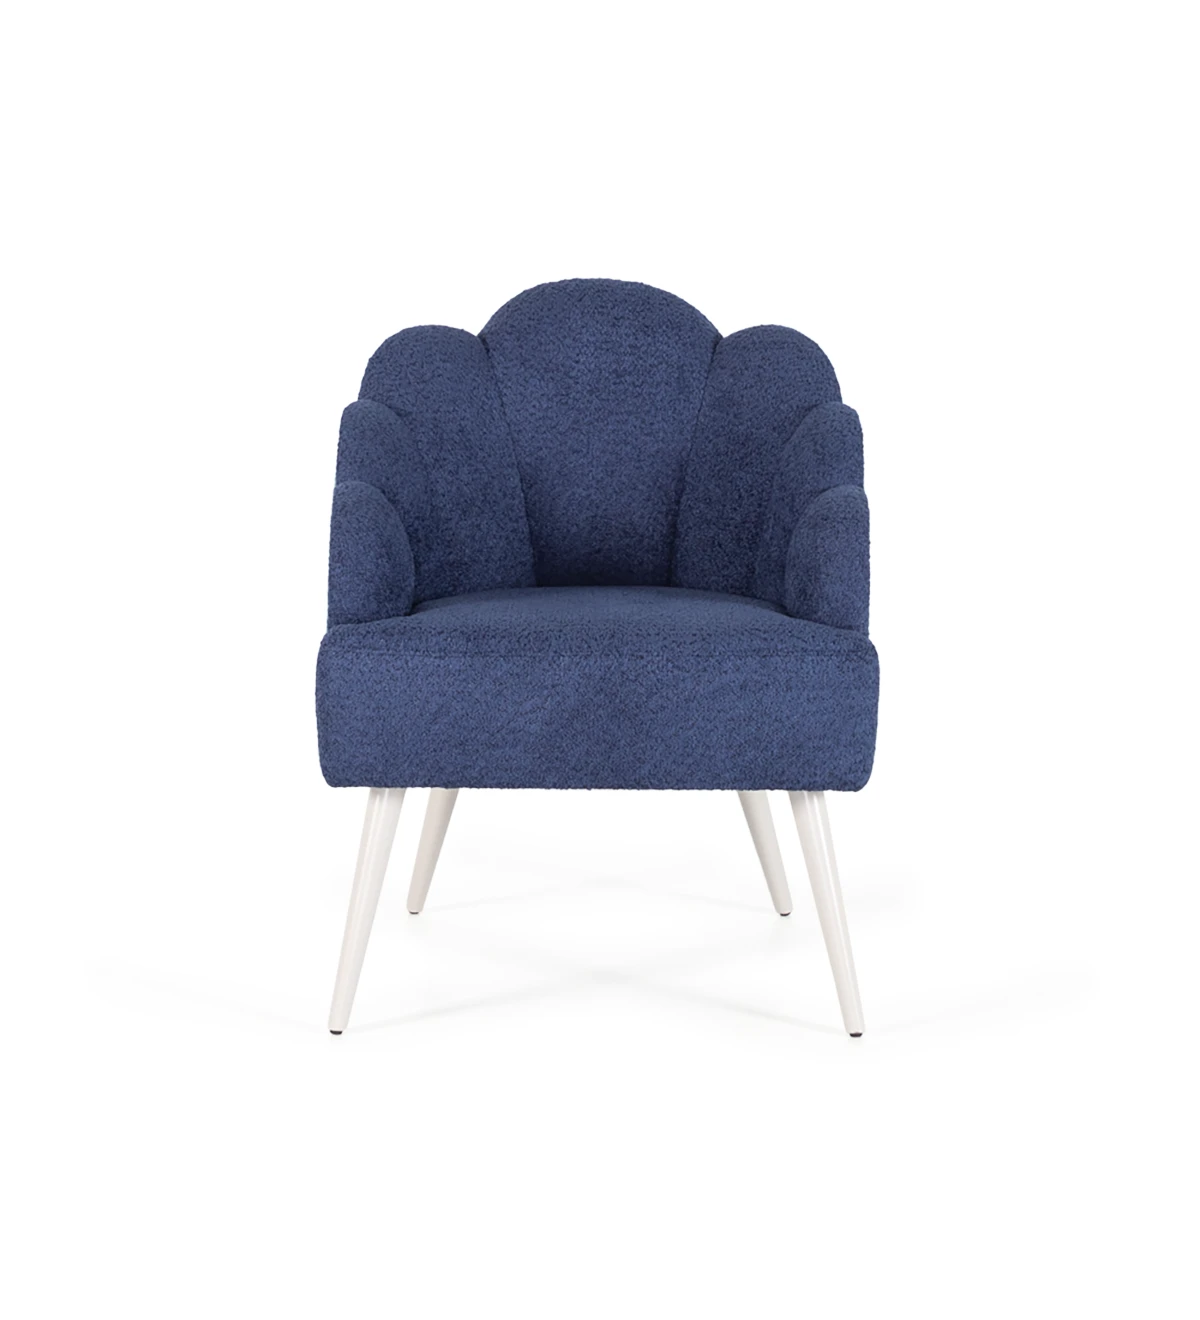 Armchair upholstered in fabric, with pearl lacquered feet.